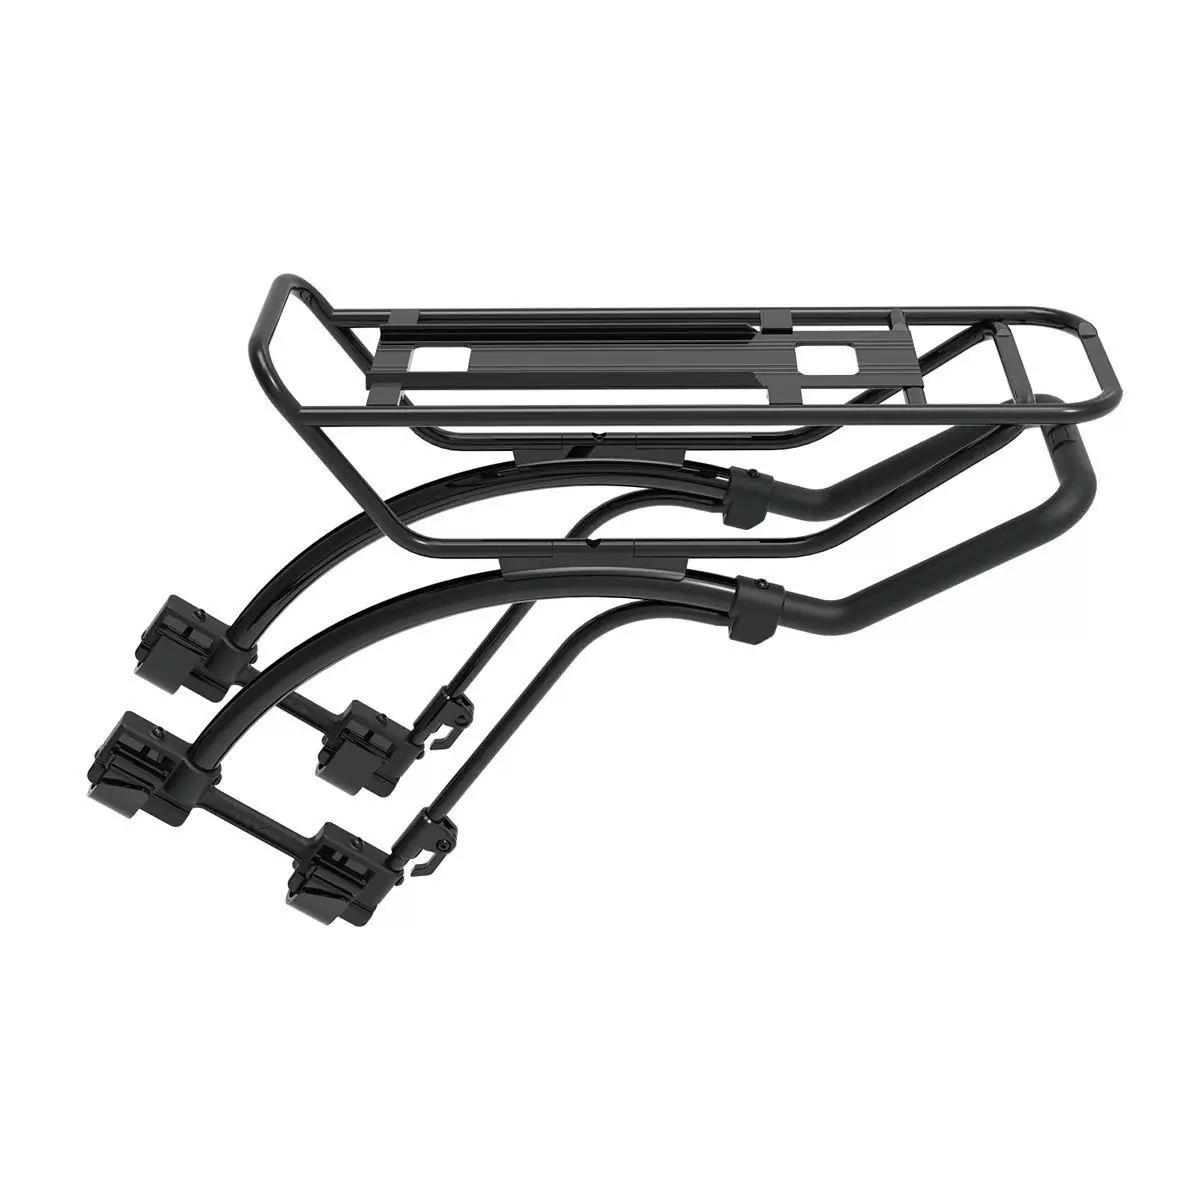 Universal Rack Tetrarack M2L with integrated QuickTrack system - image